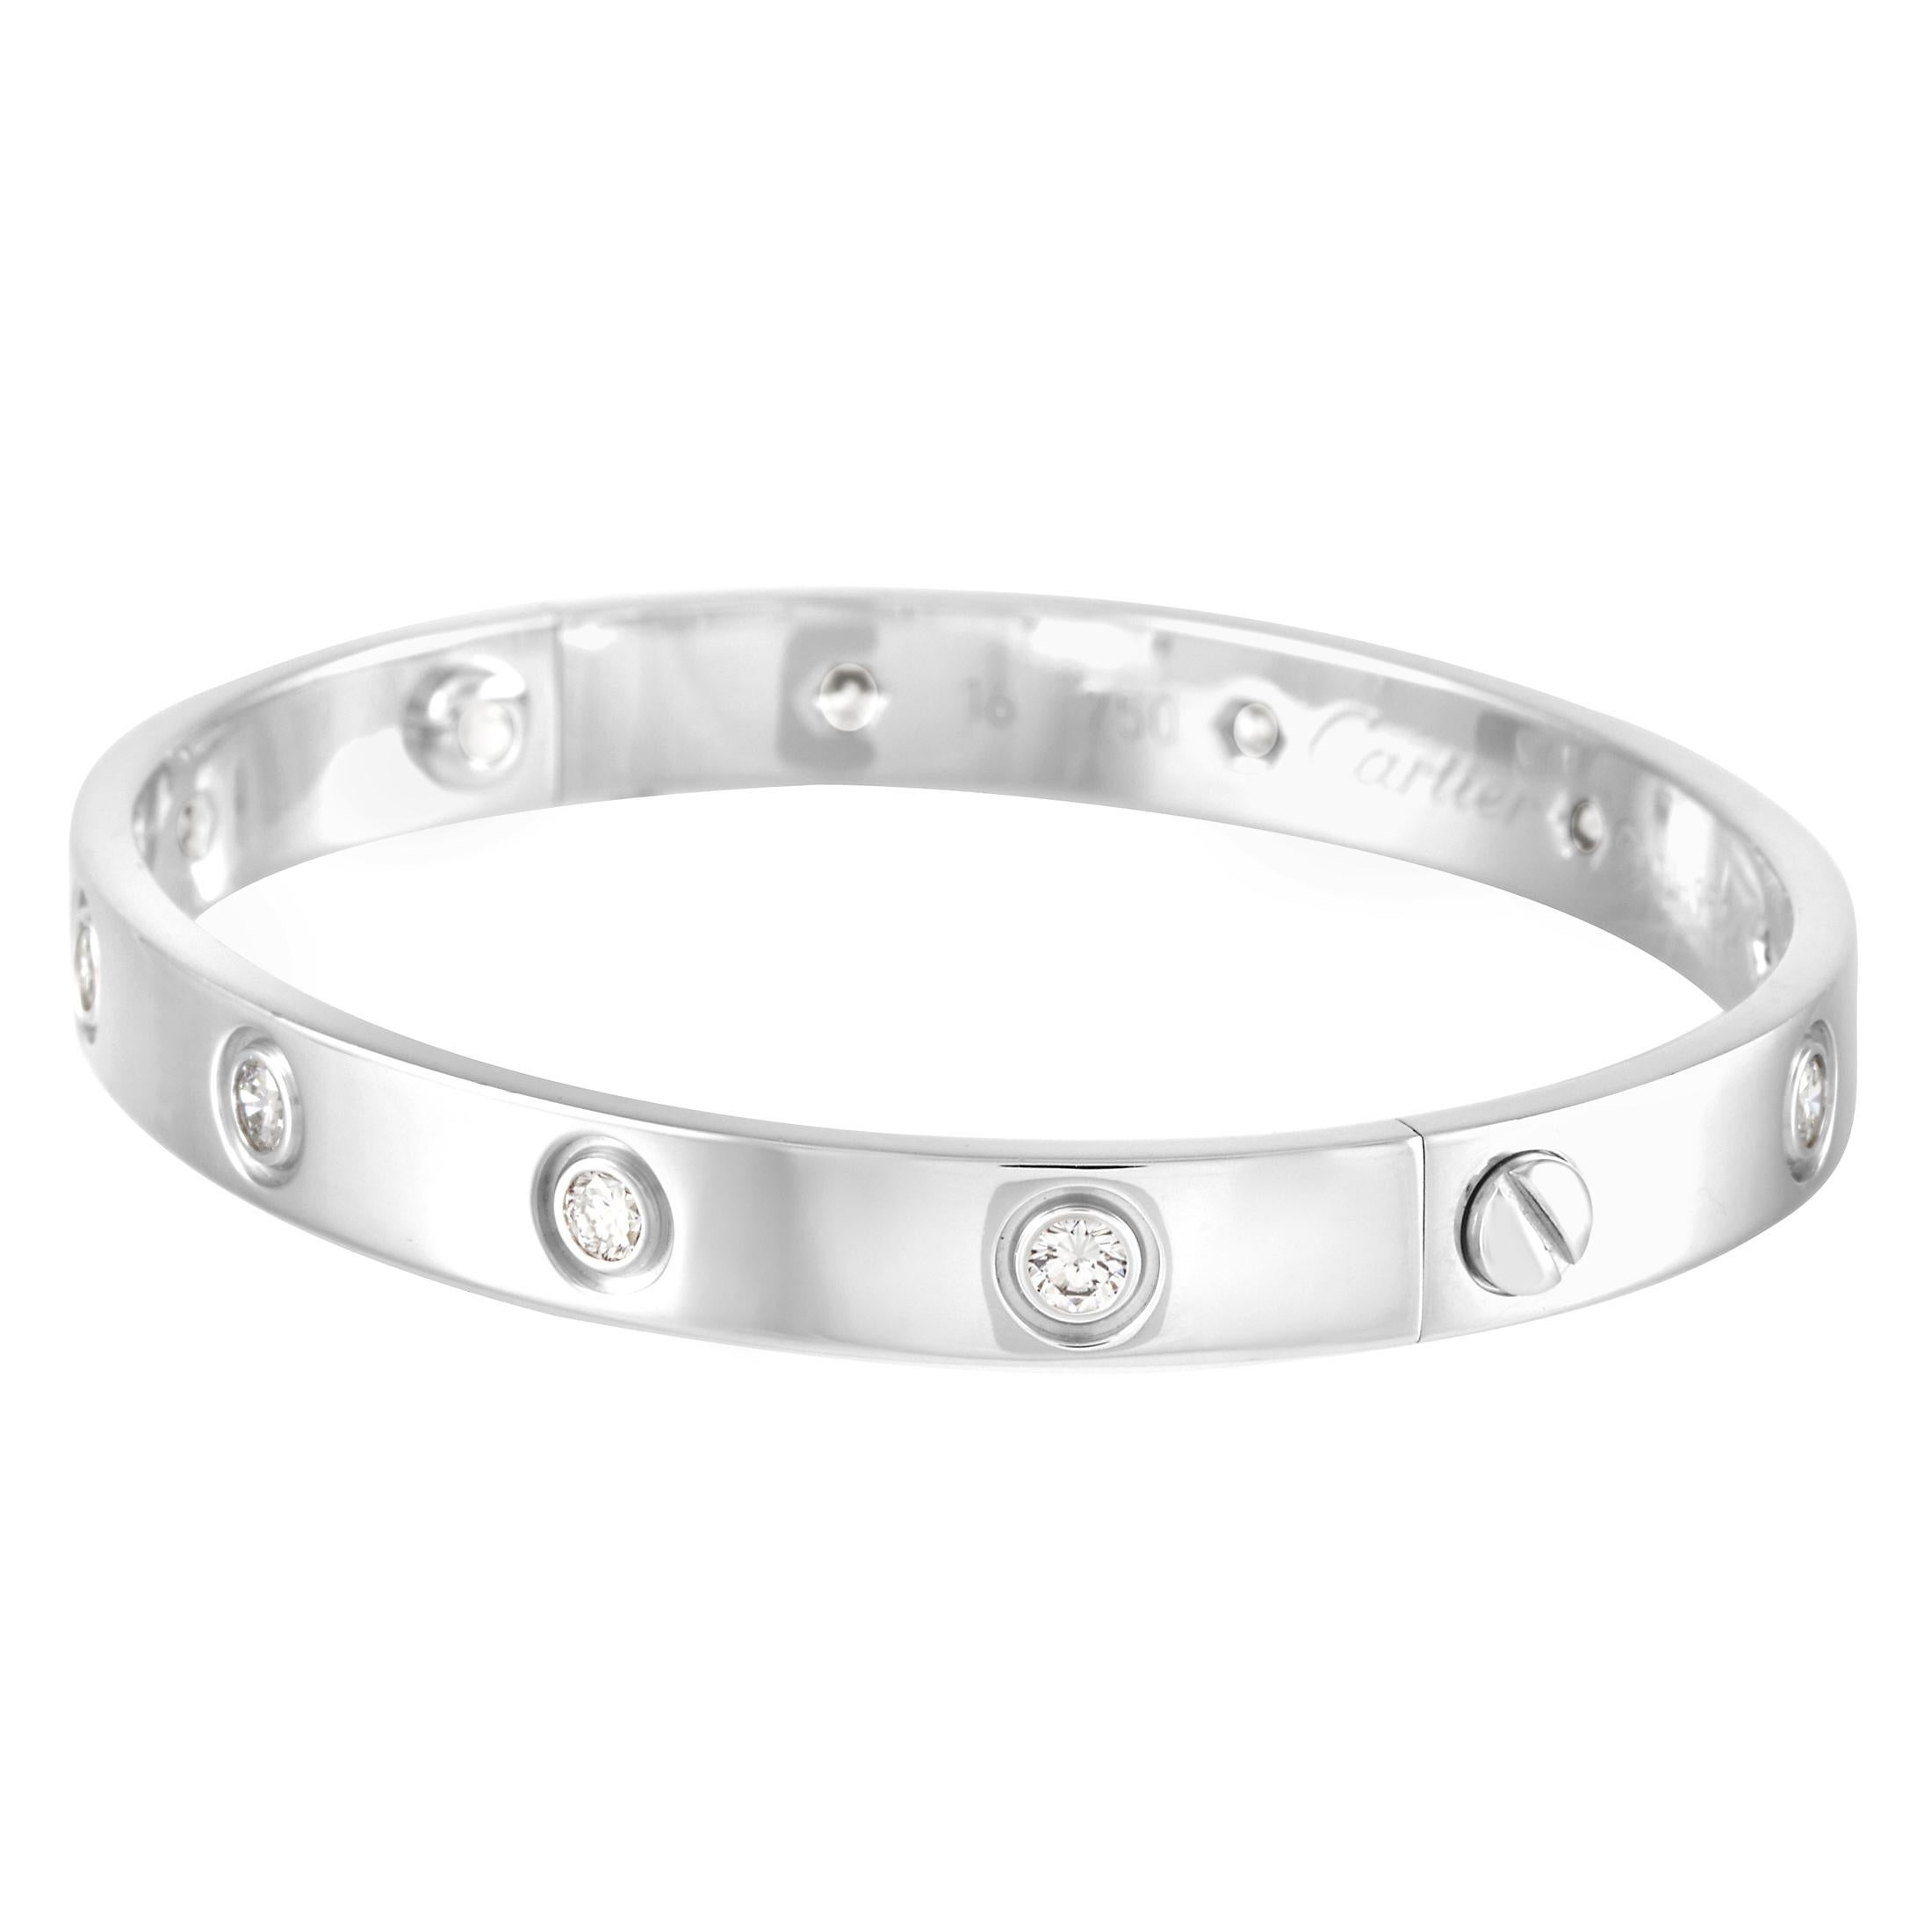 This Cartier LOVE 18K White Gold Diamond Bangle Bracelet is a classic Cartier offering. The simple bangle is made with 18K white gold and 10 bezel set round diamonds. The inside of the bangle is inscribed with the brand name. The bracelet has a